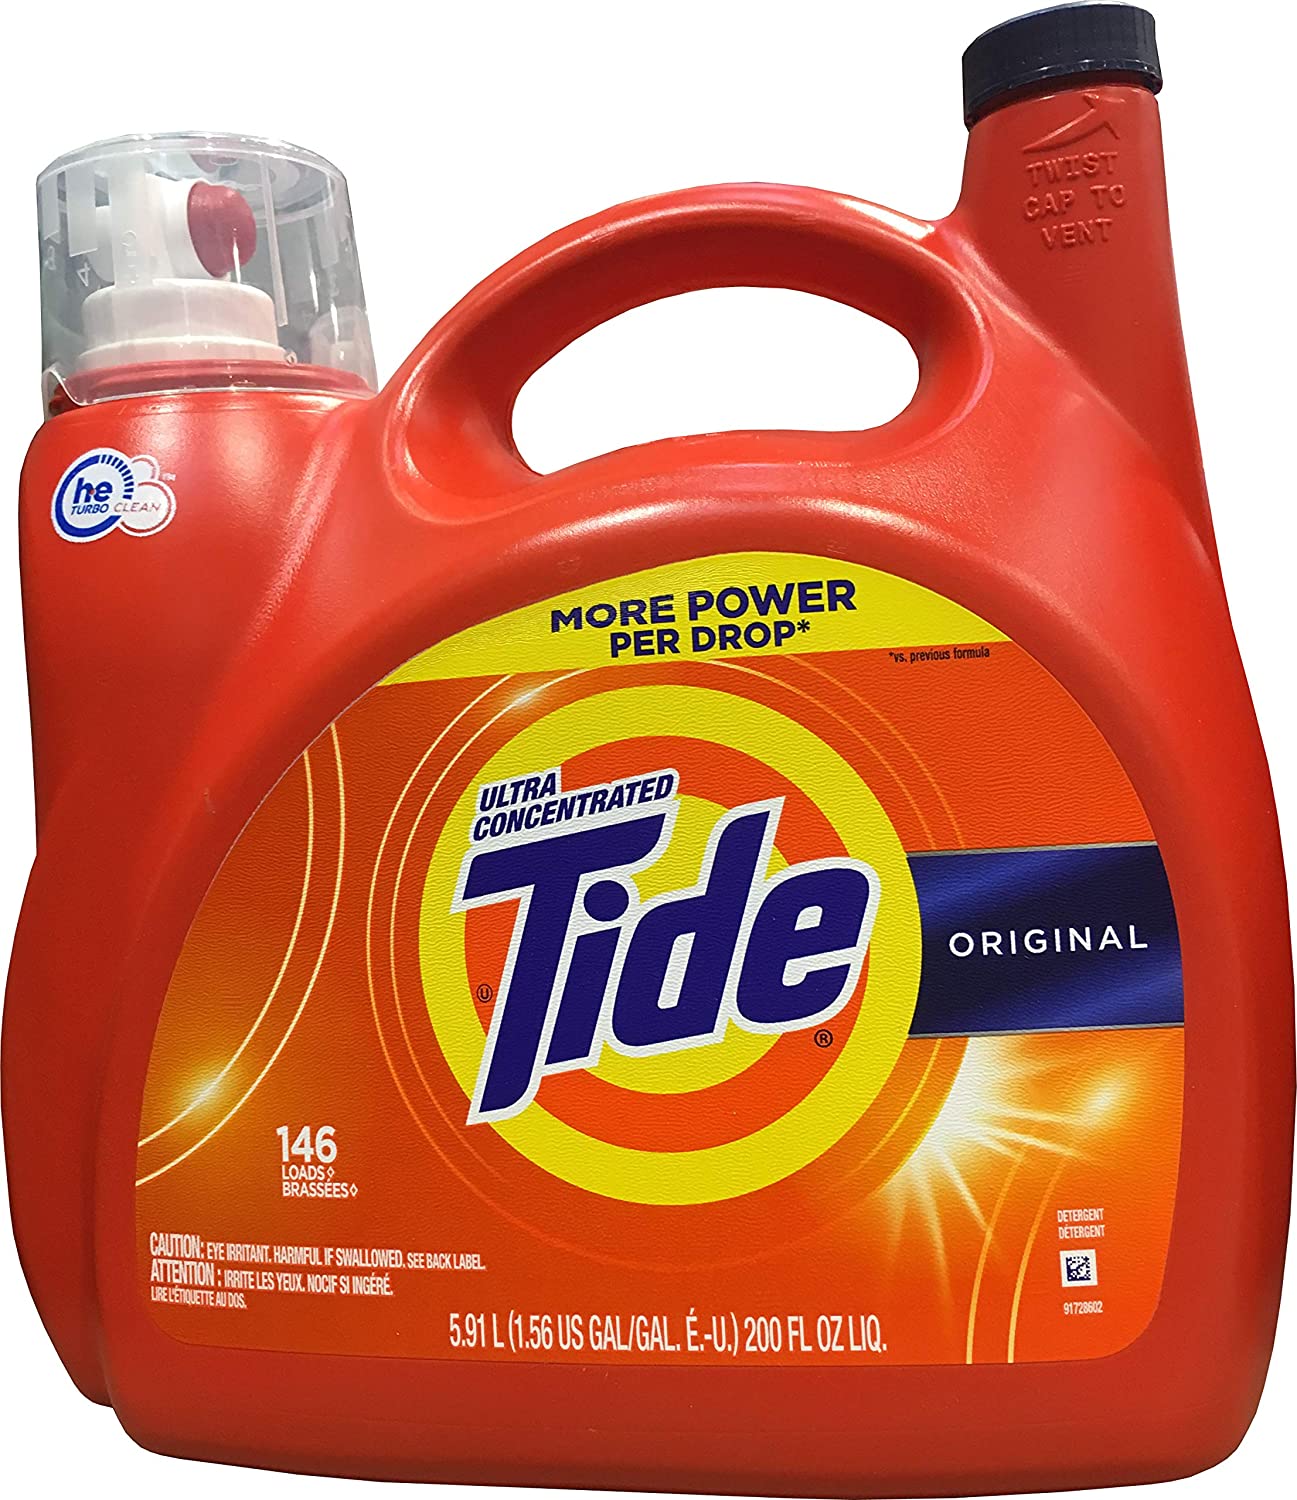 Tide Ultra Concentrated Original Laundry Detergent 200 FL oz, Stain-Fighting Giant